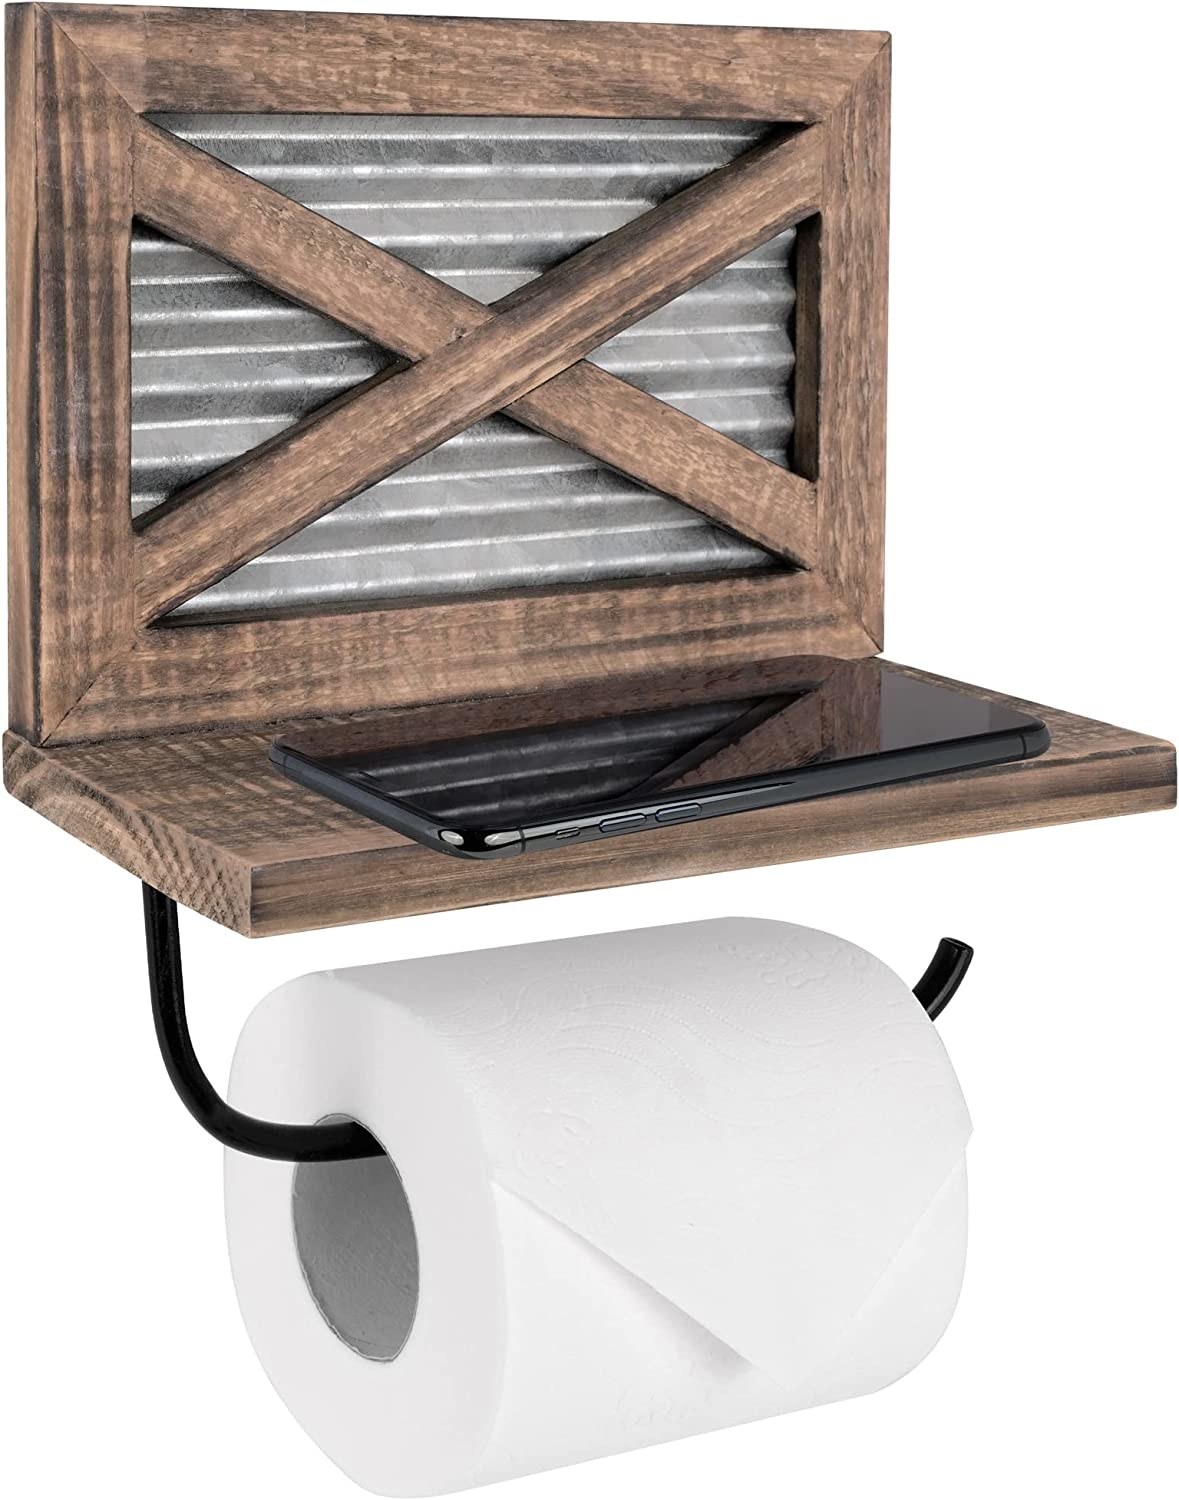 A wooden toilet paper holder with a shelf above the roll for placing a phone